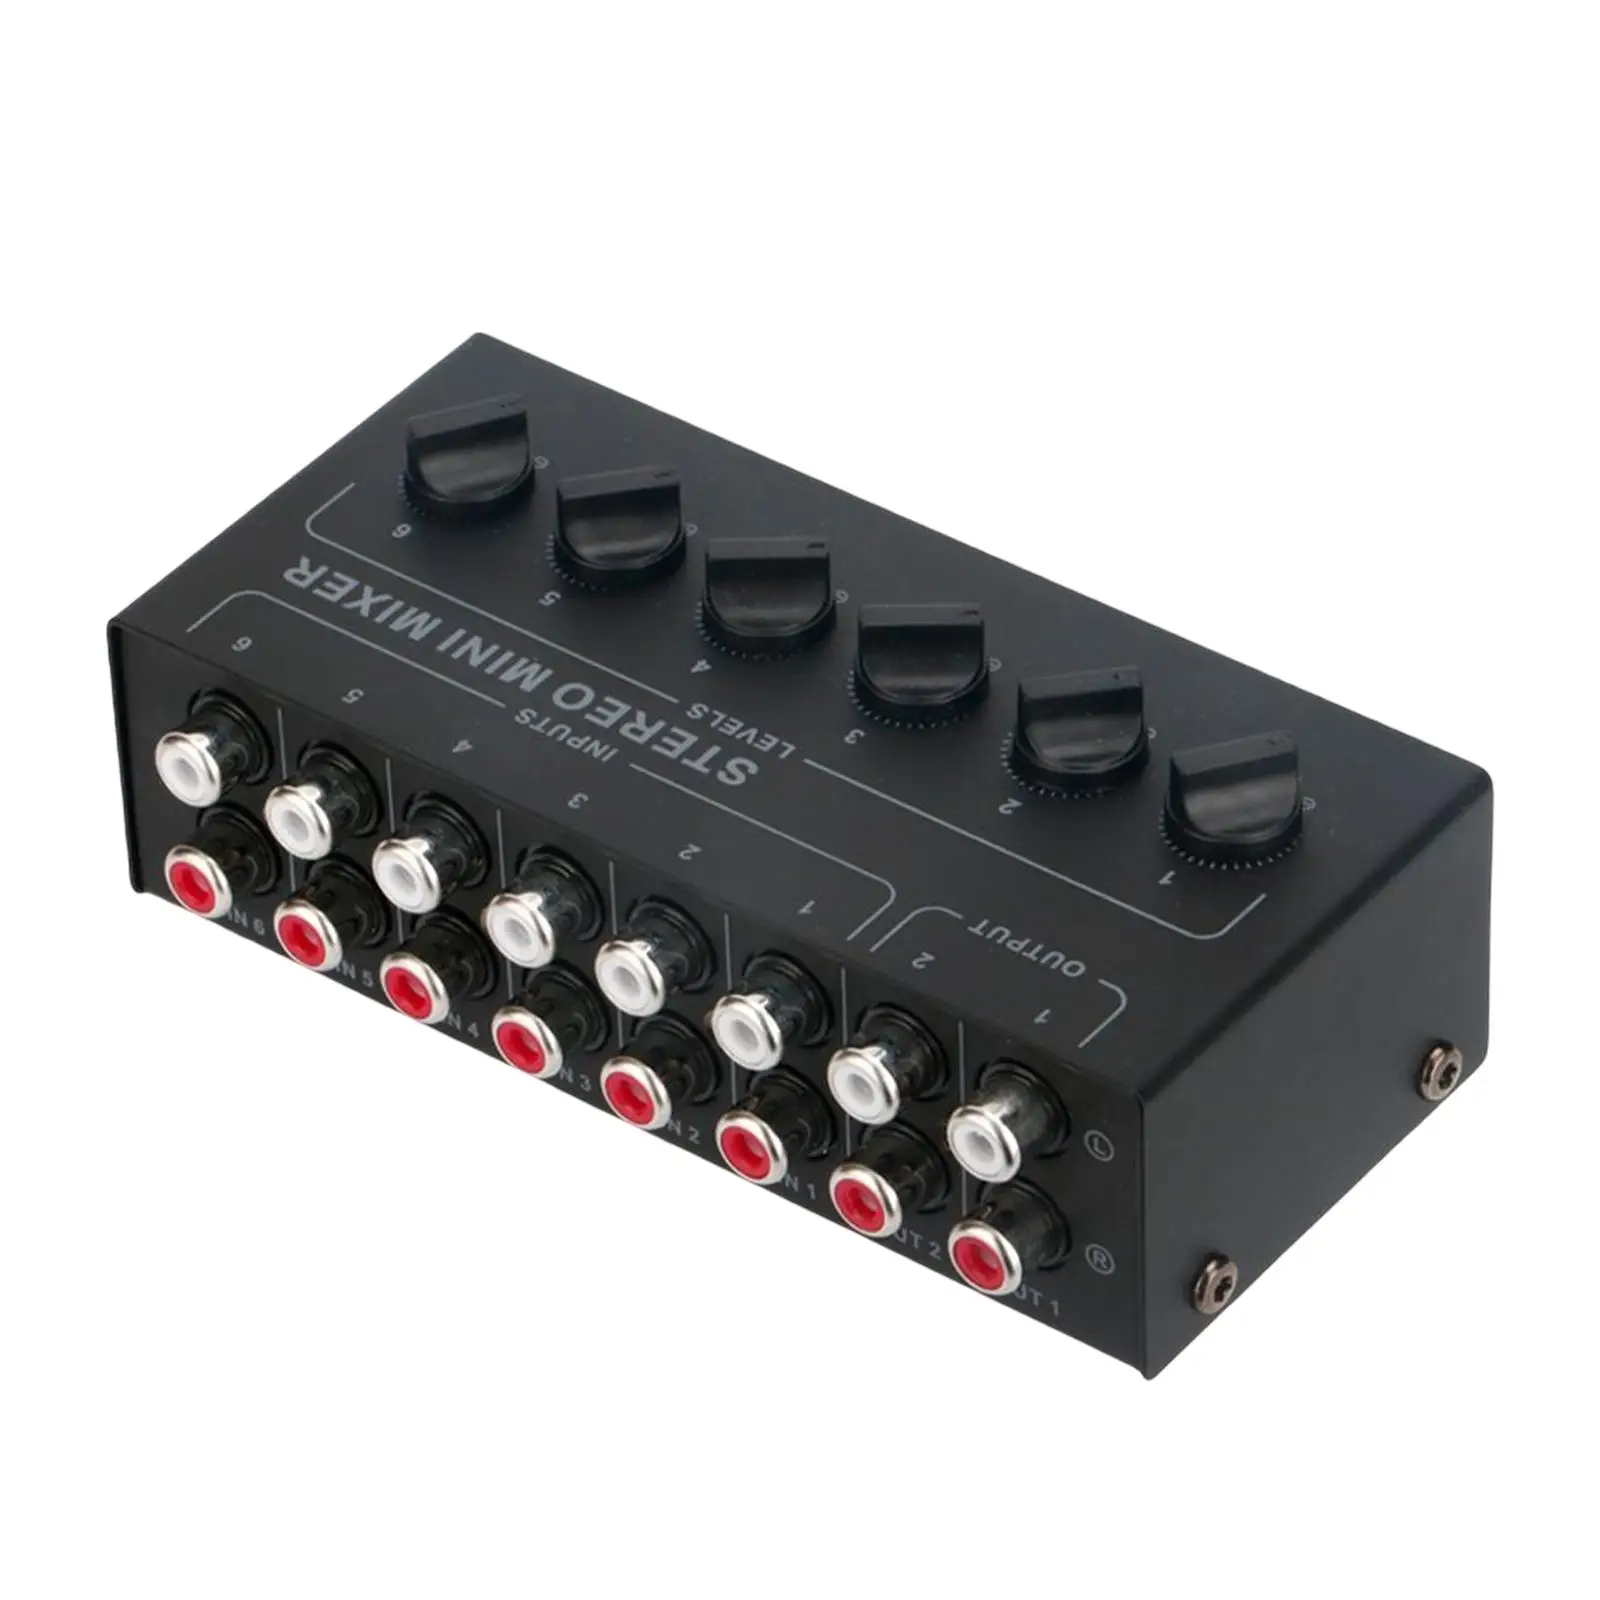 6 Channel Stereo Mixer Portable Small Mixer Compact for Recording DJ Broadcast Party